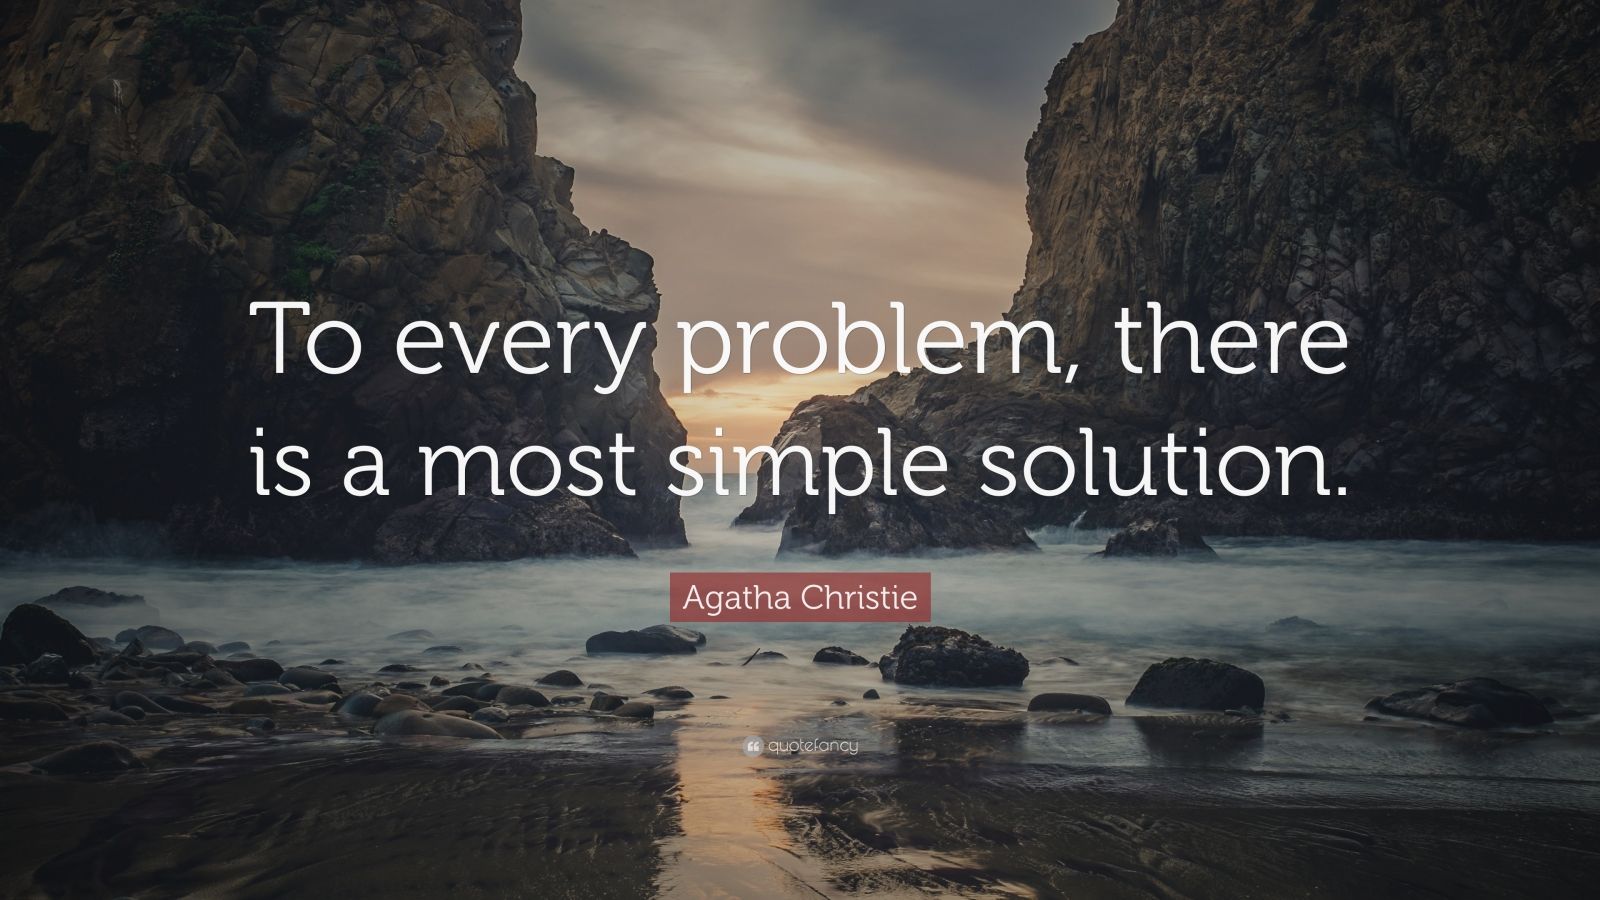 Agatha Christie Quote: “To every problem, there is a most simple ...